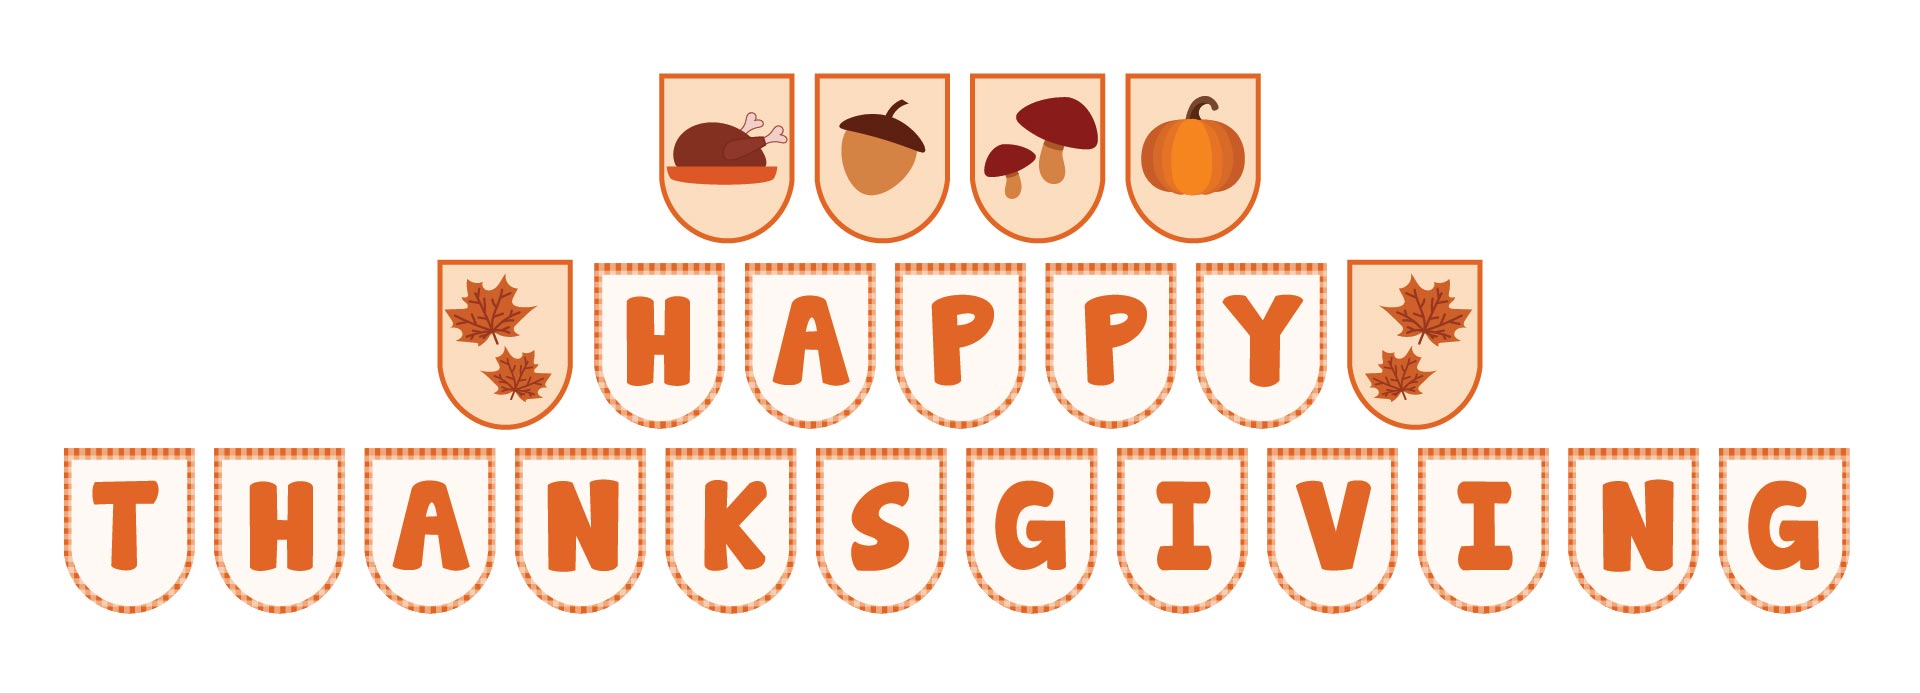 7 Best Images of Thanksgiving Banner Printable - Free Printable ...